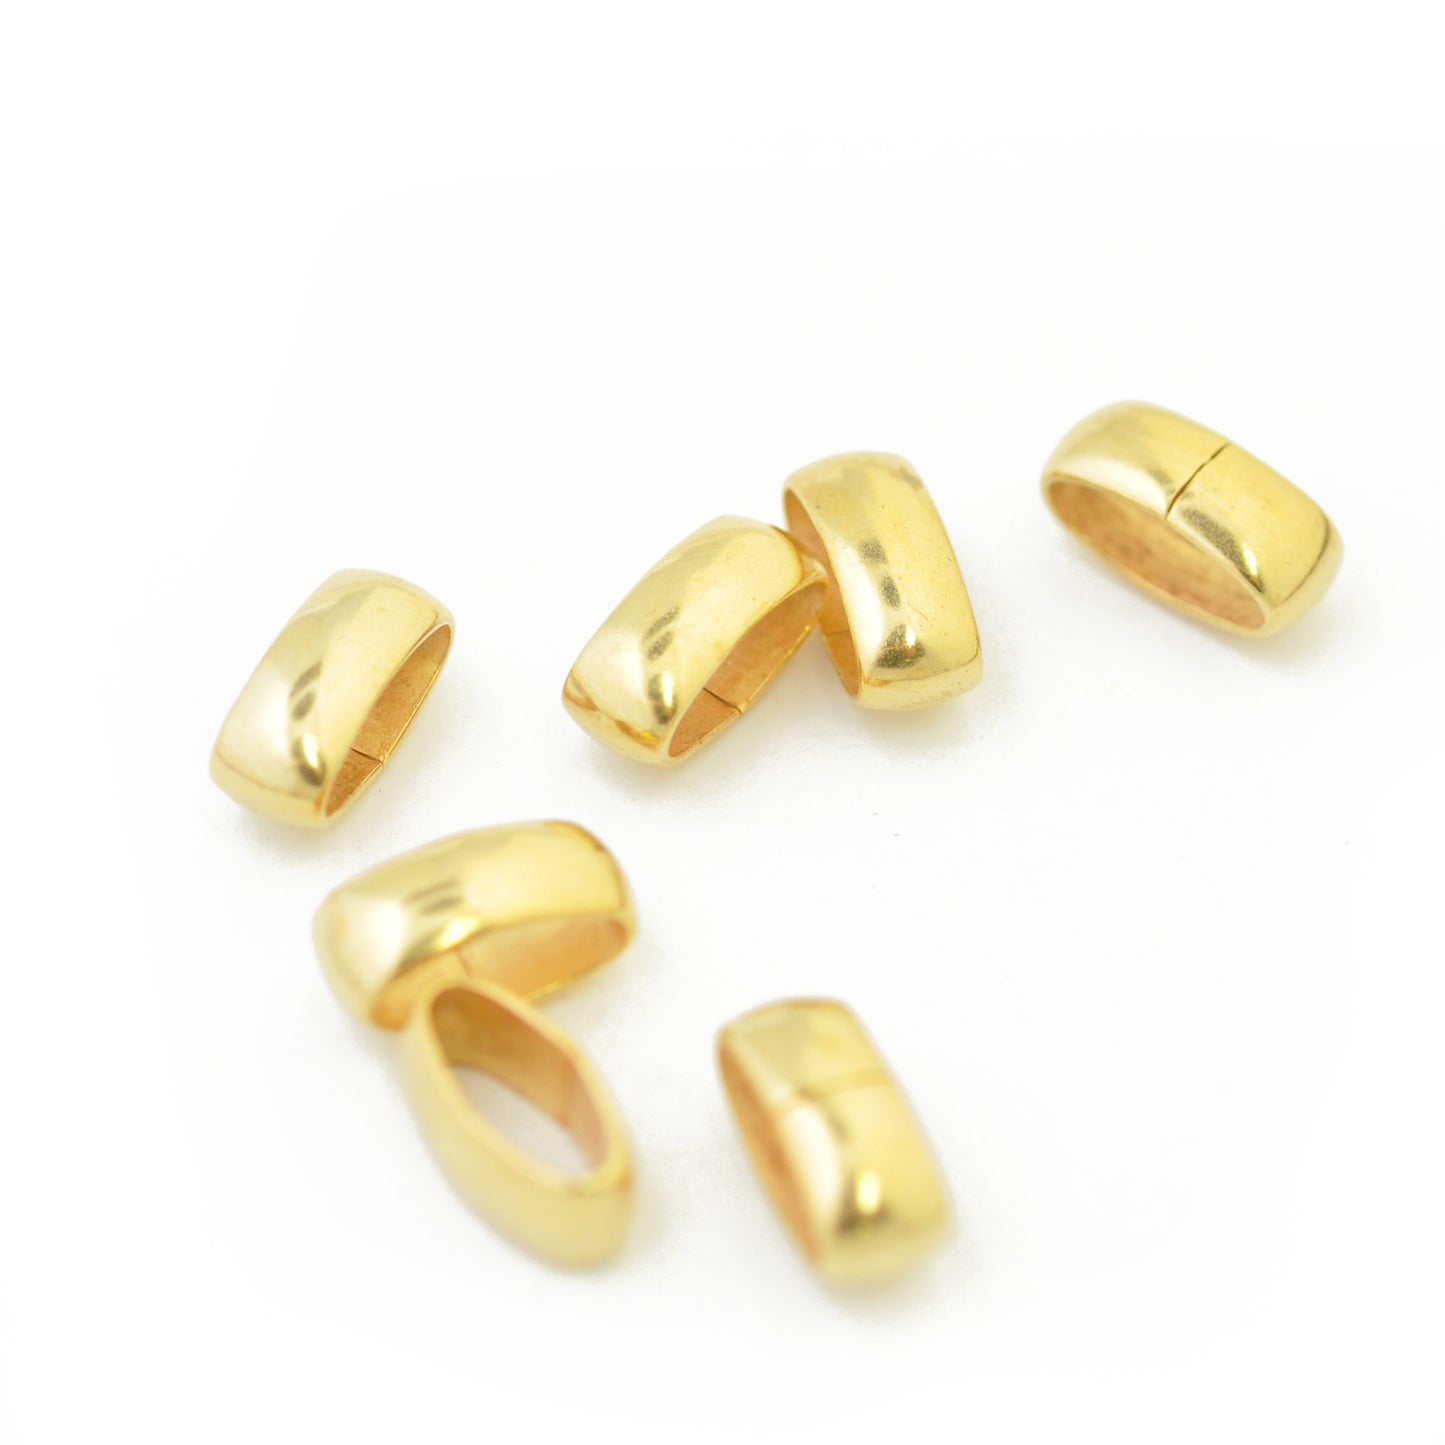 Oval metal spacer / gold colored / 12 mm